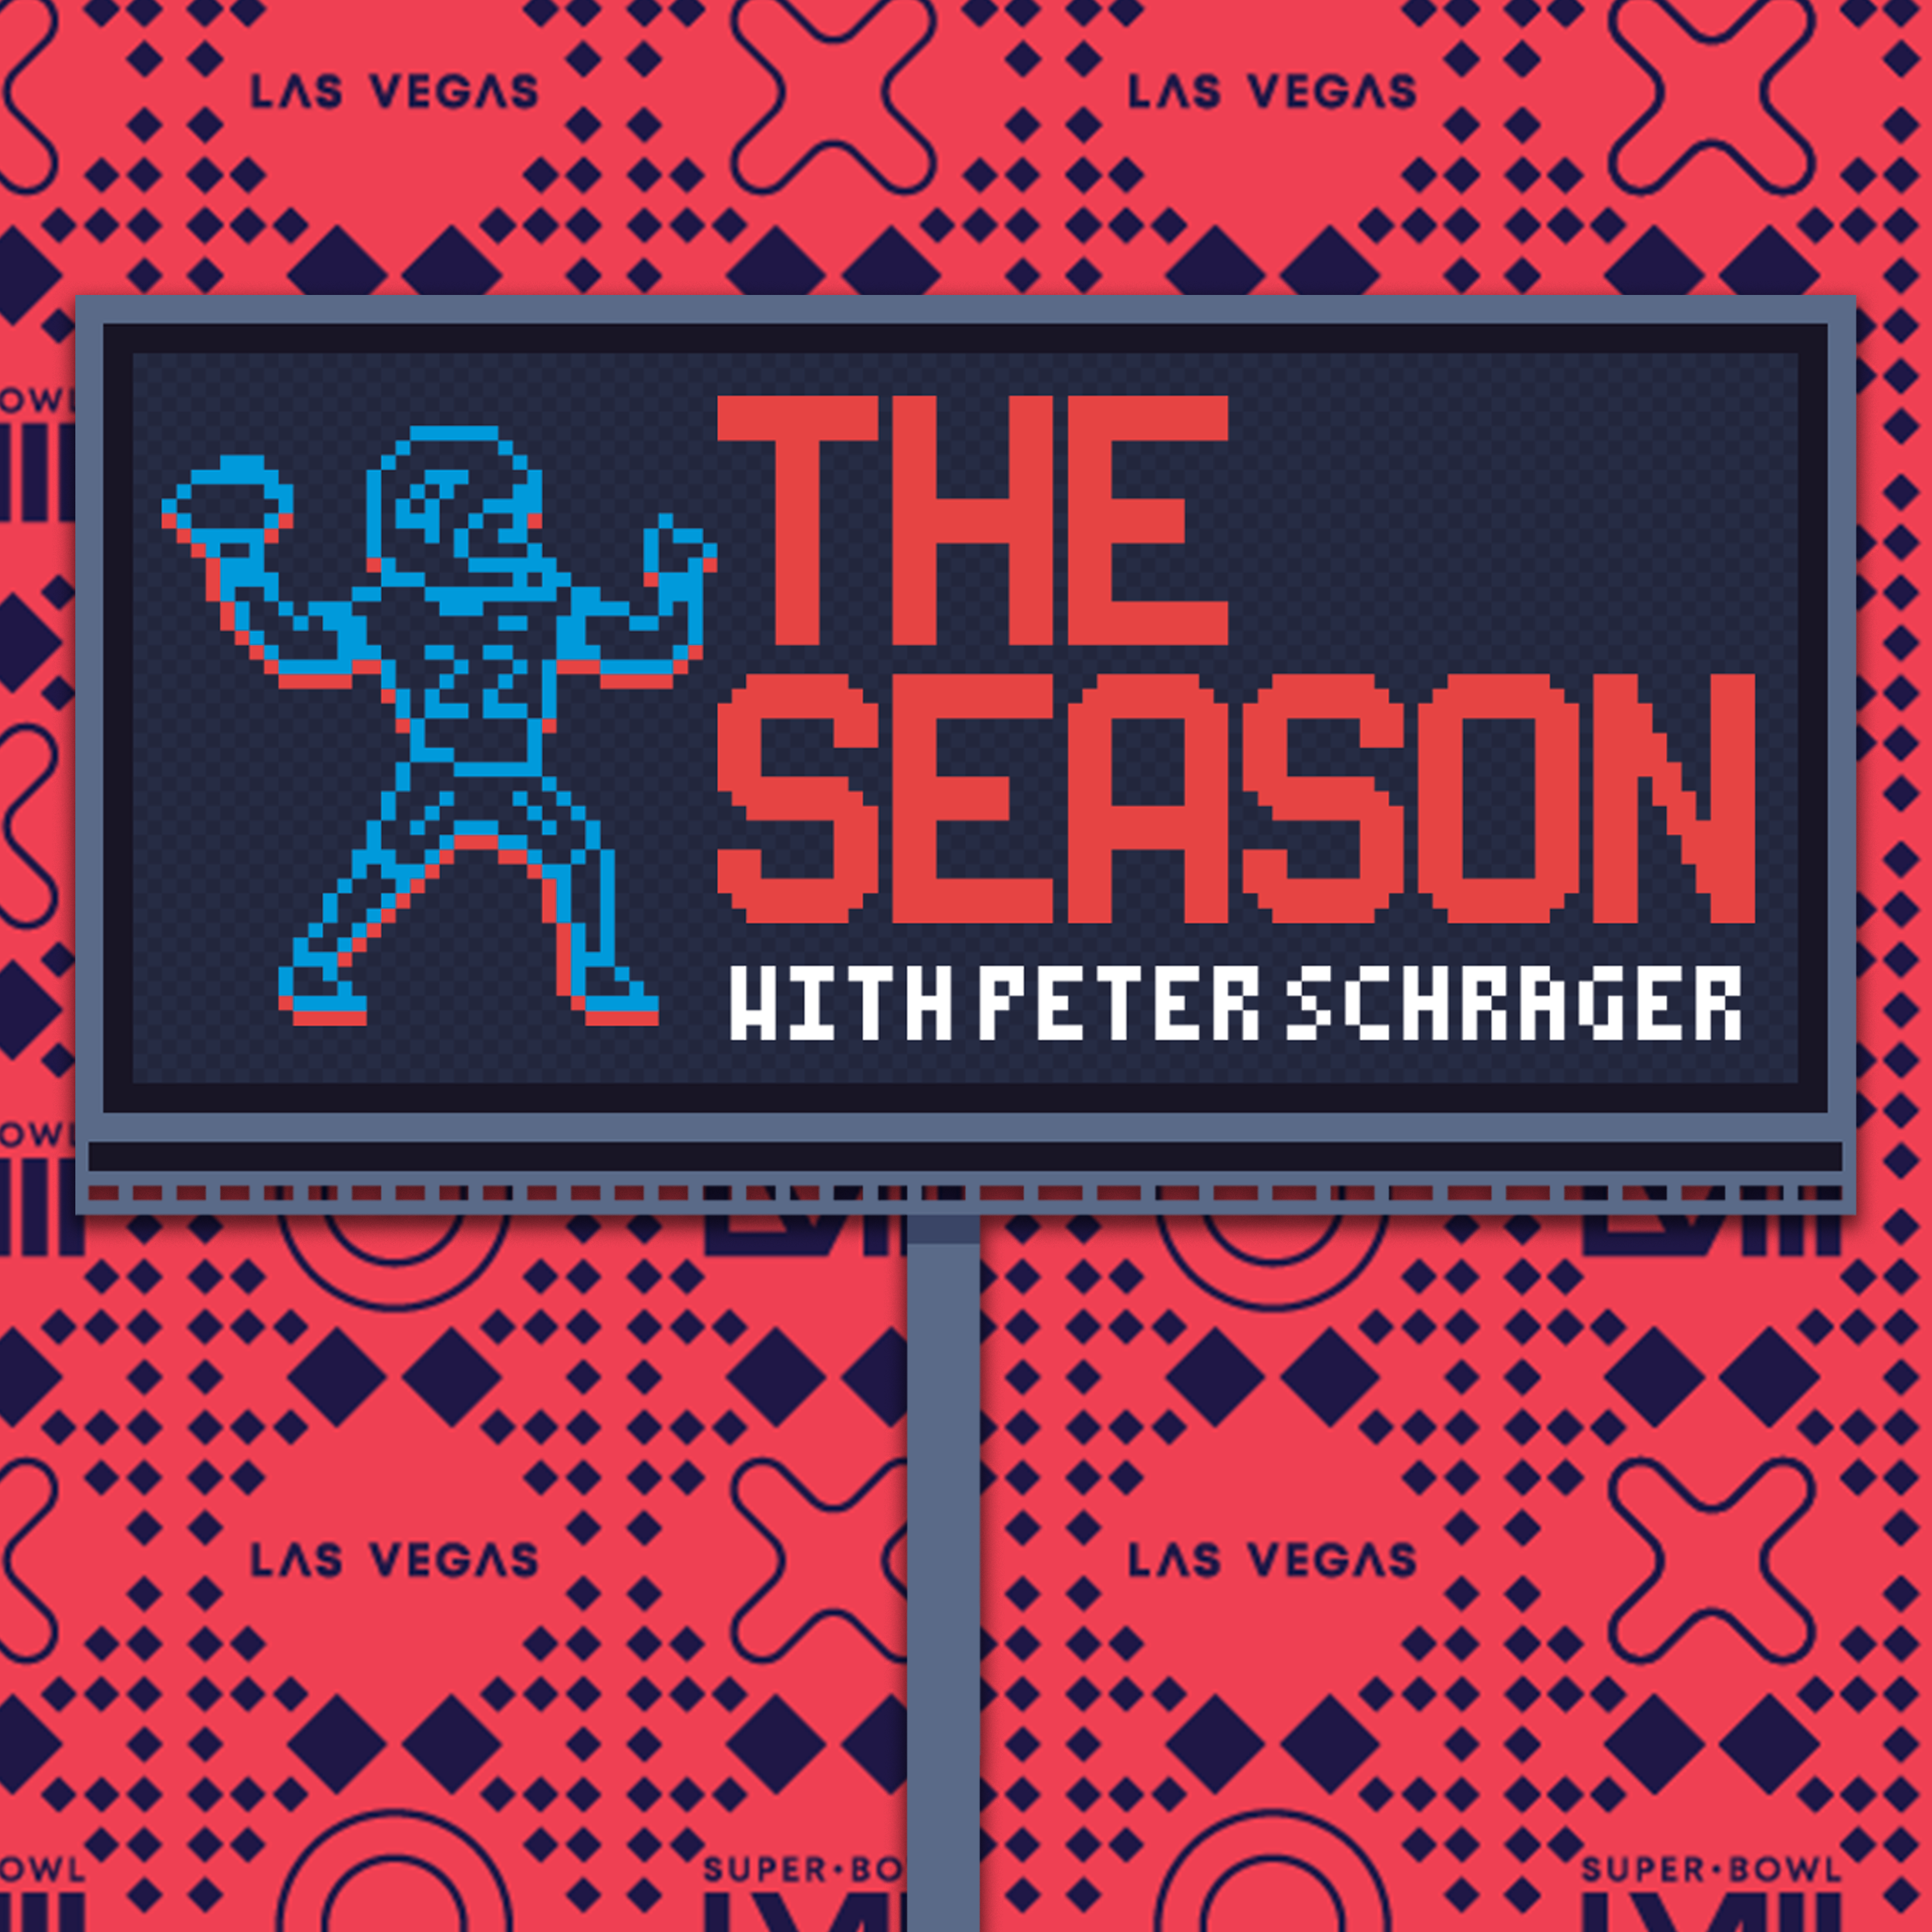 The Season with Peter Schrager: Chris "Mad Dog" Russo and Peter's official Super Bowl XLVIII prediction